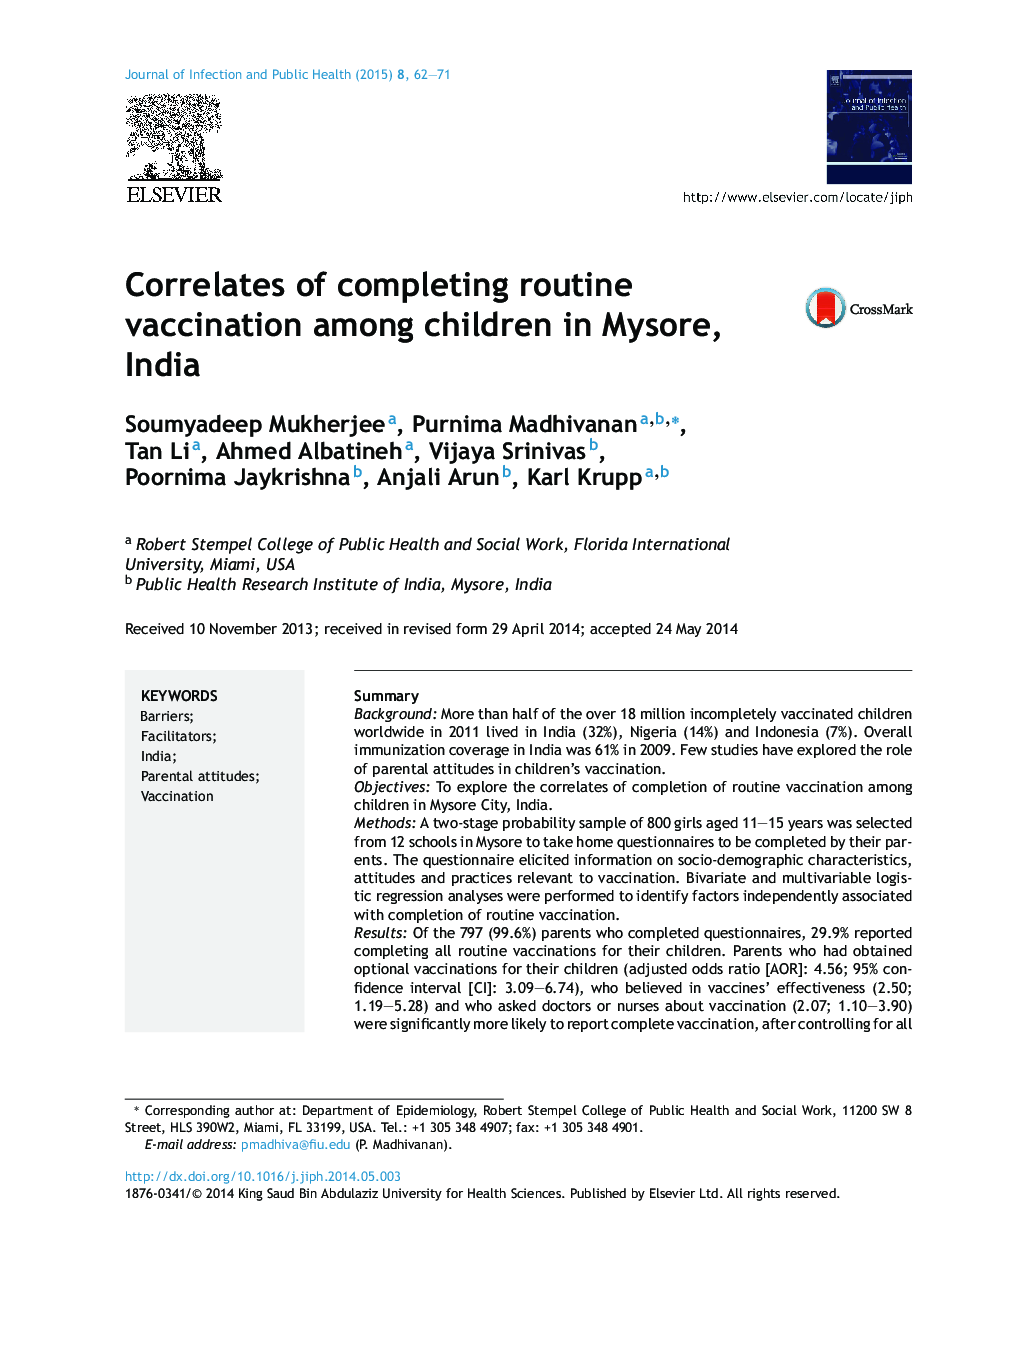 Correlates of completing routine vaccination among children in Mysore, India